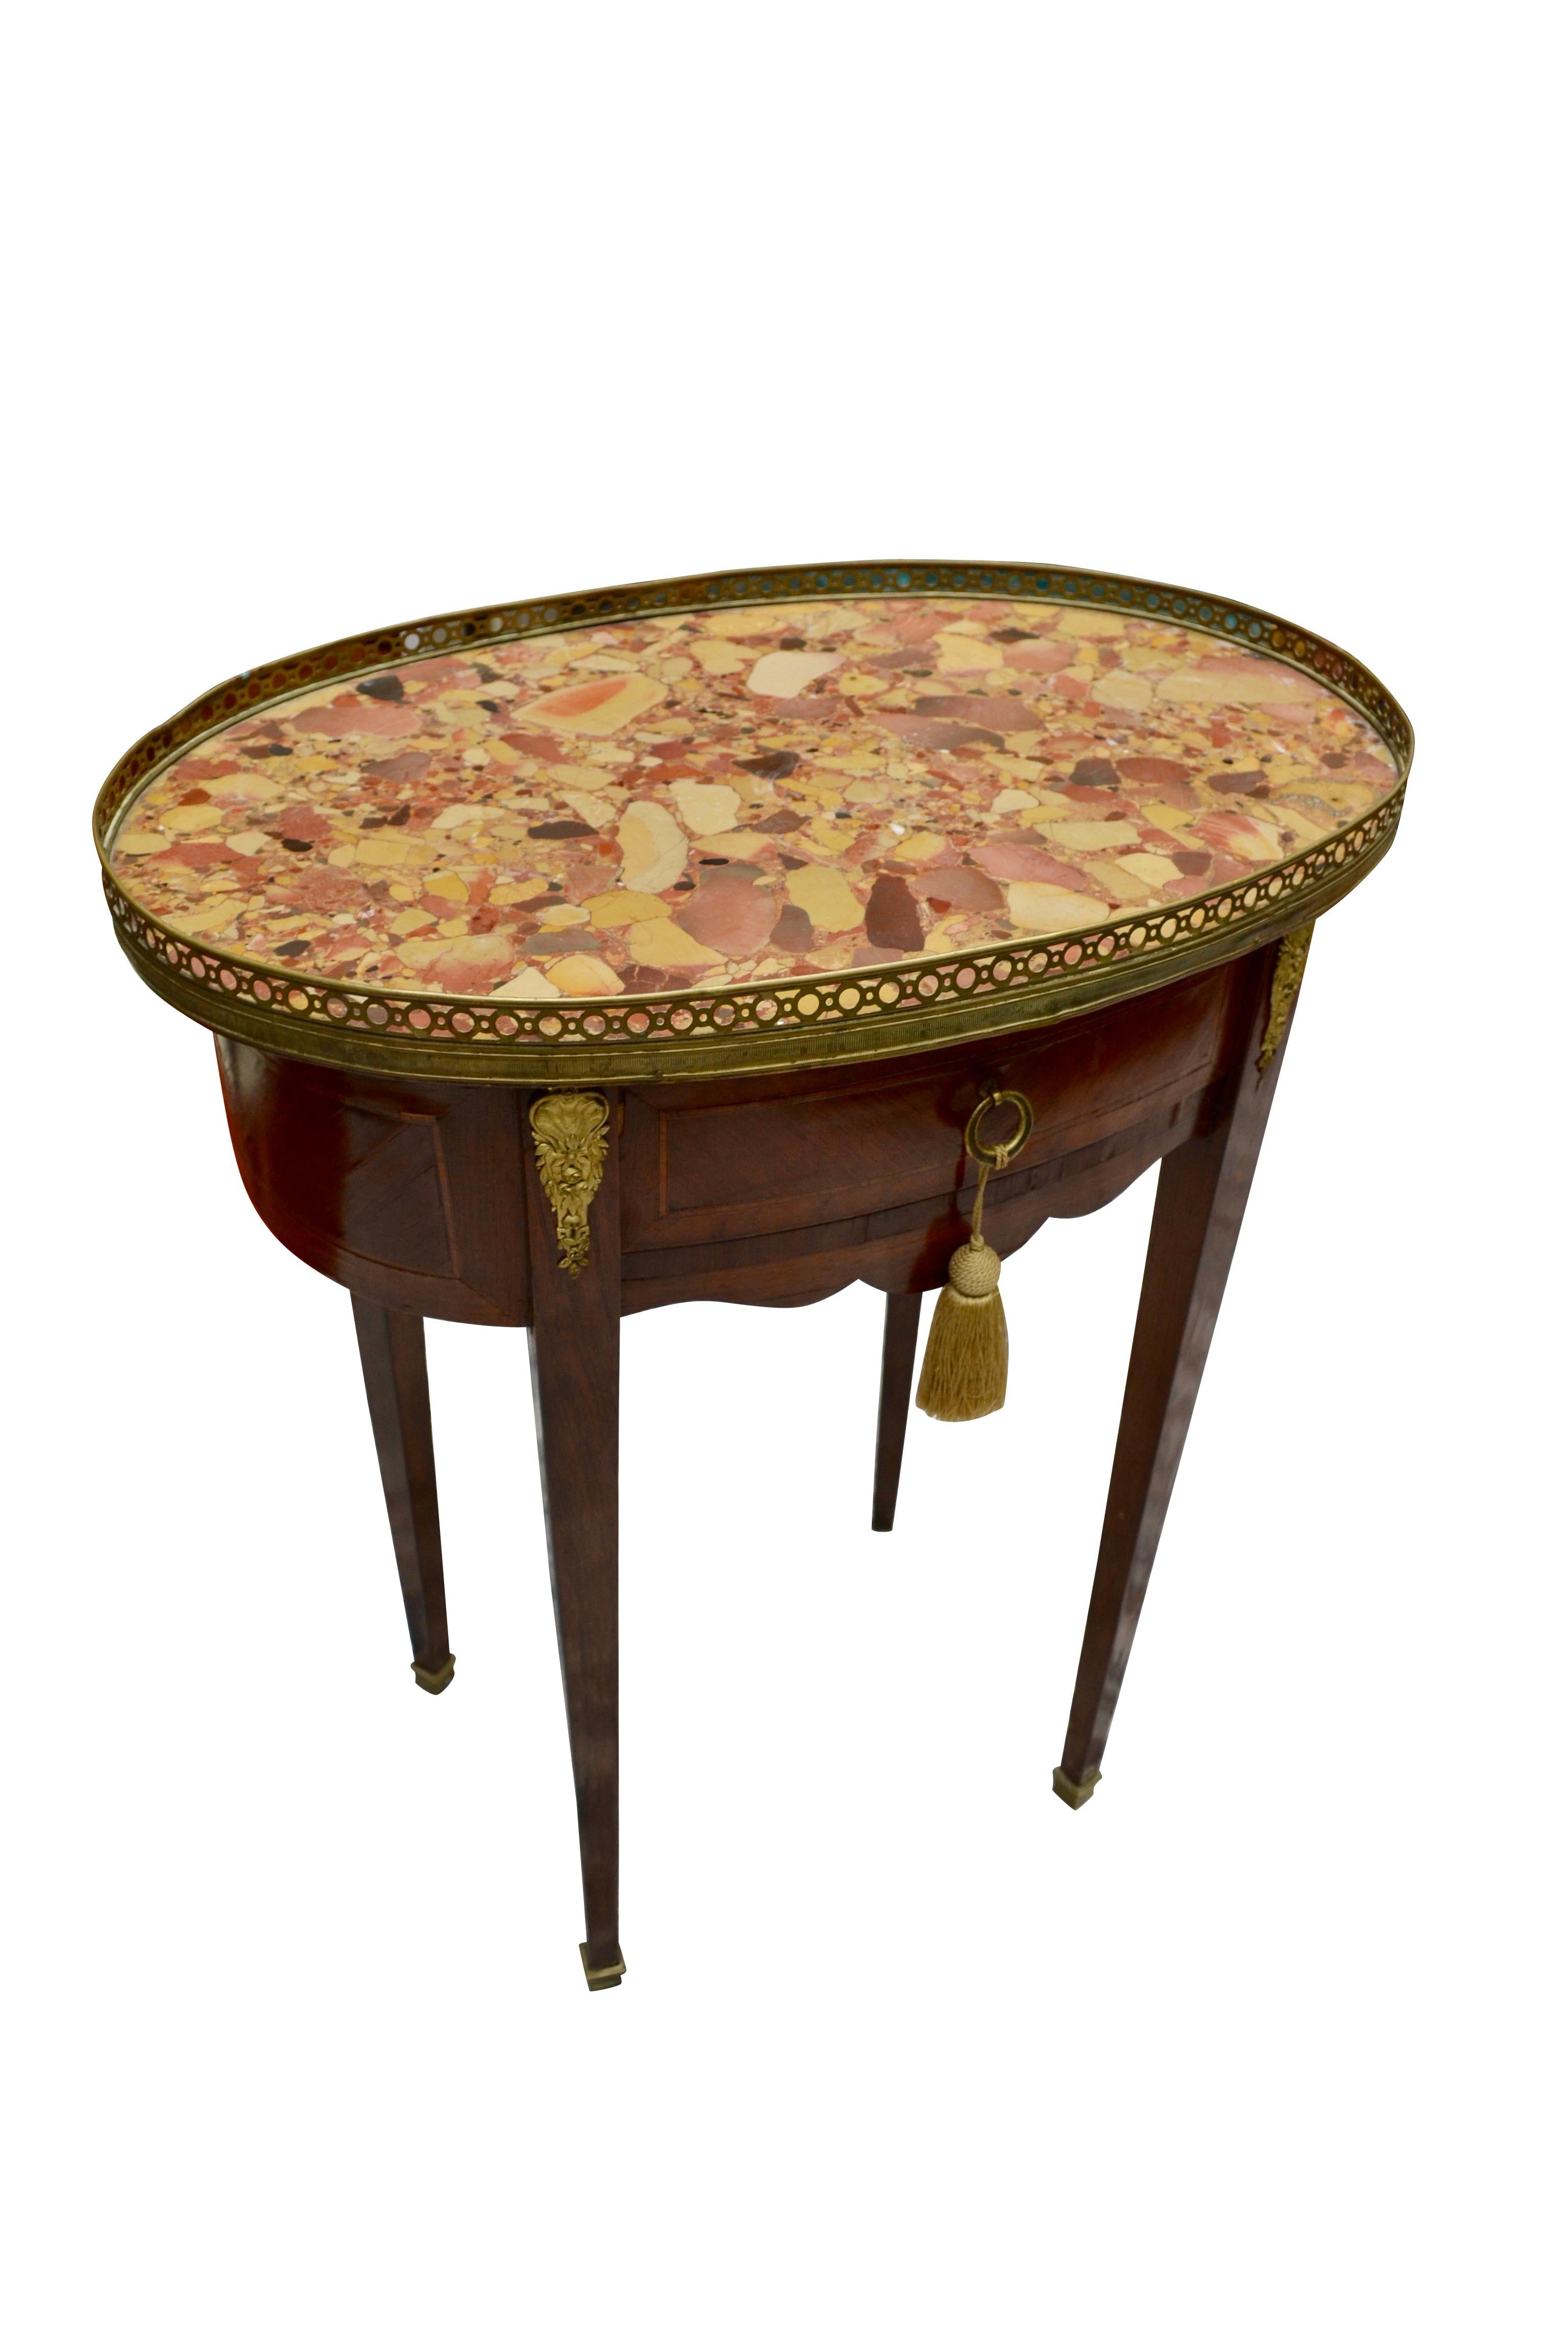 The frame of this oval table is veneered in various exotic woods, kingwood, amaranth, tulipwood. There is one drawer below a galleried brocaatel marble top. The table sits on four tapered straight legs with gilded metal mounts at the top and brass